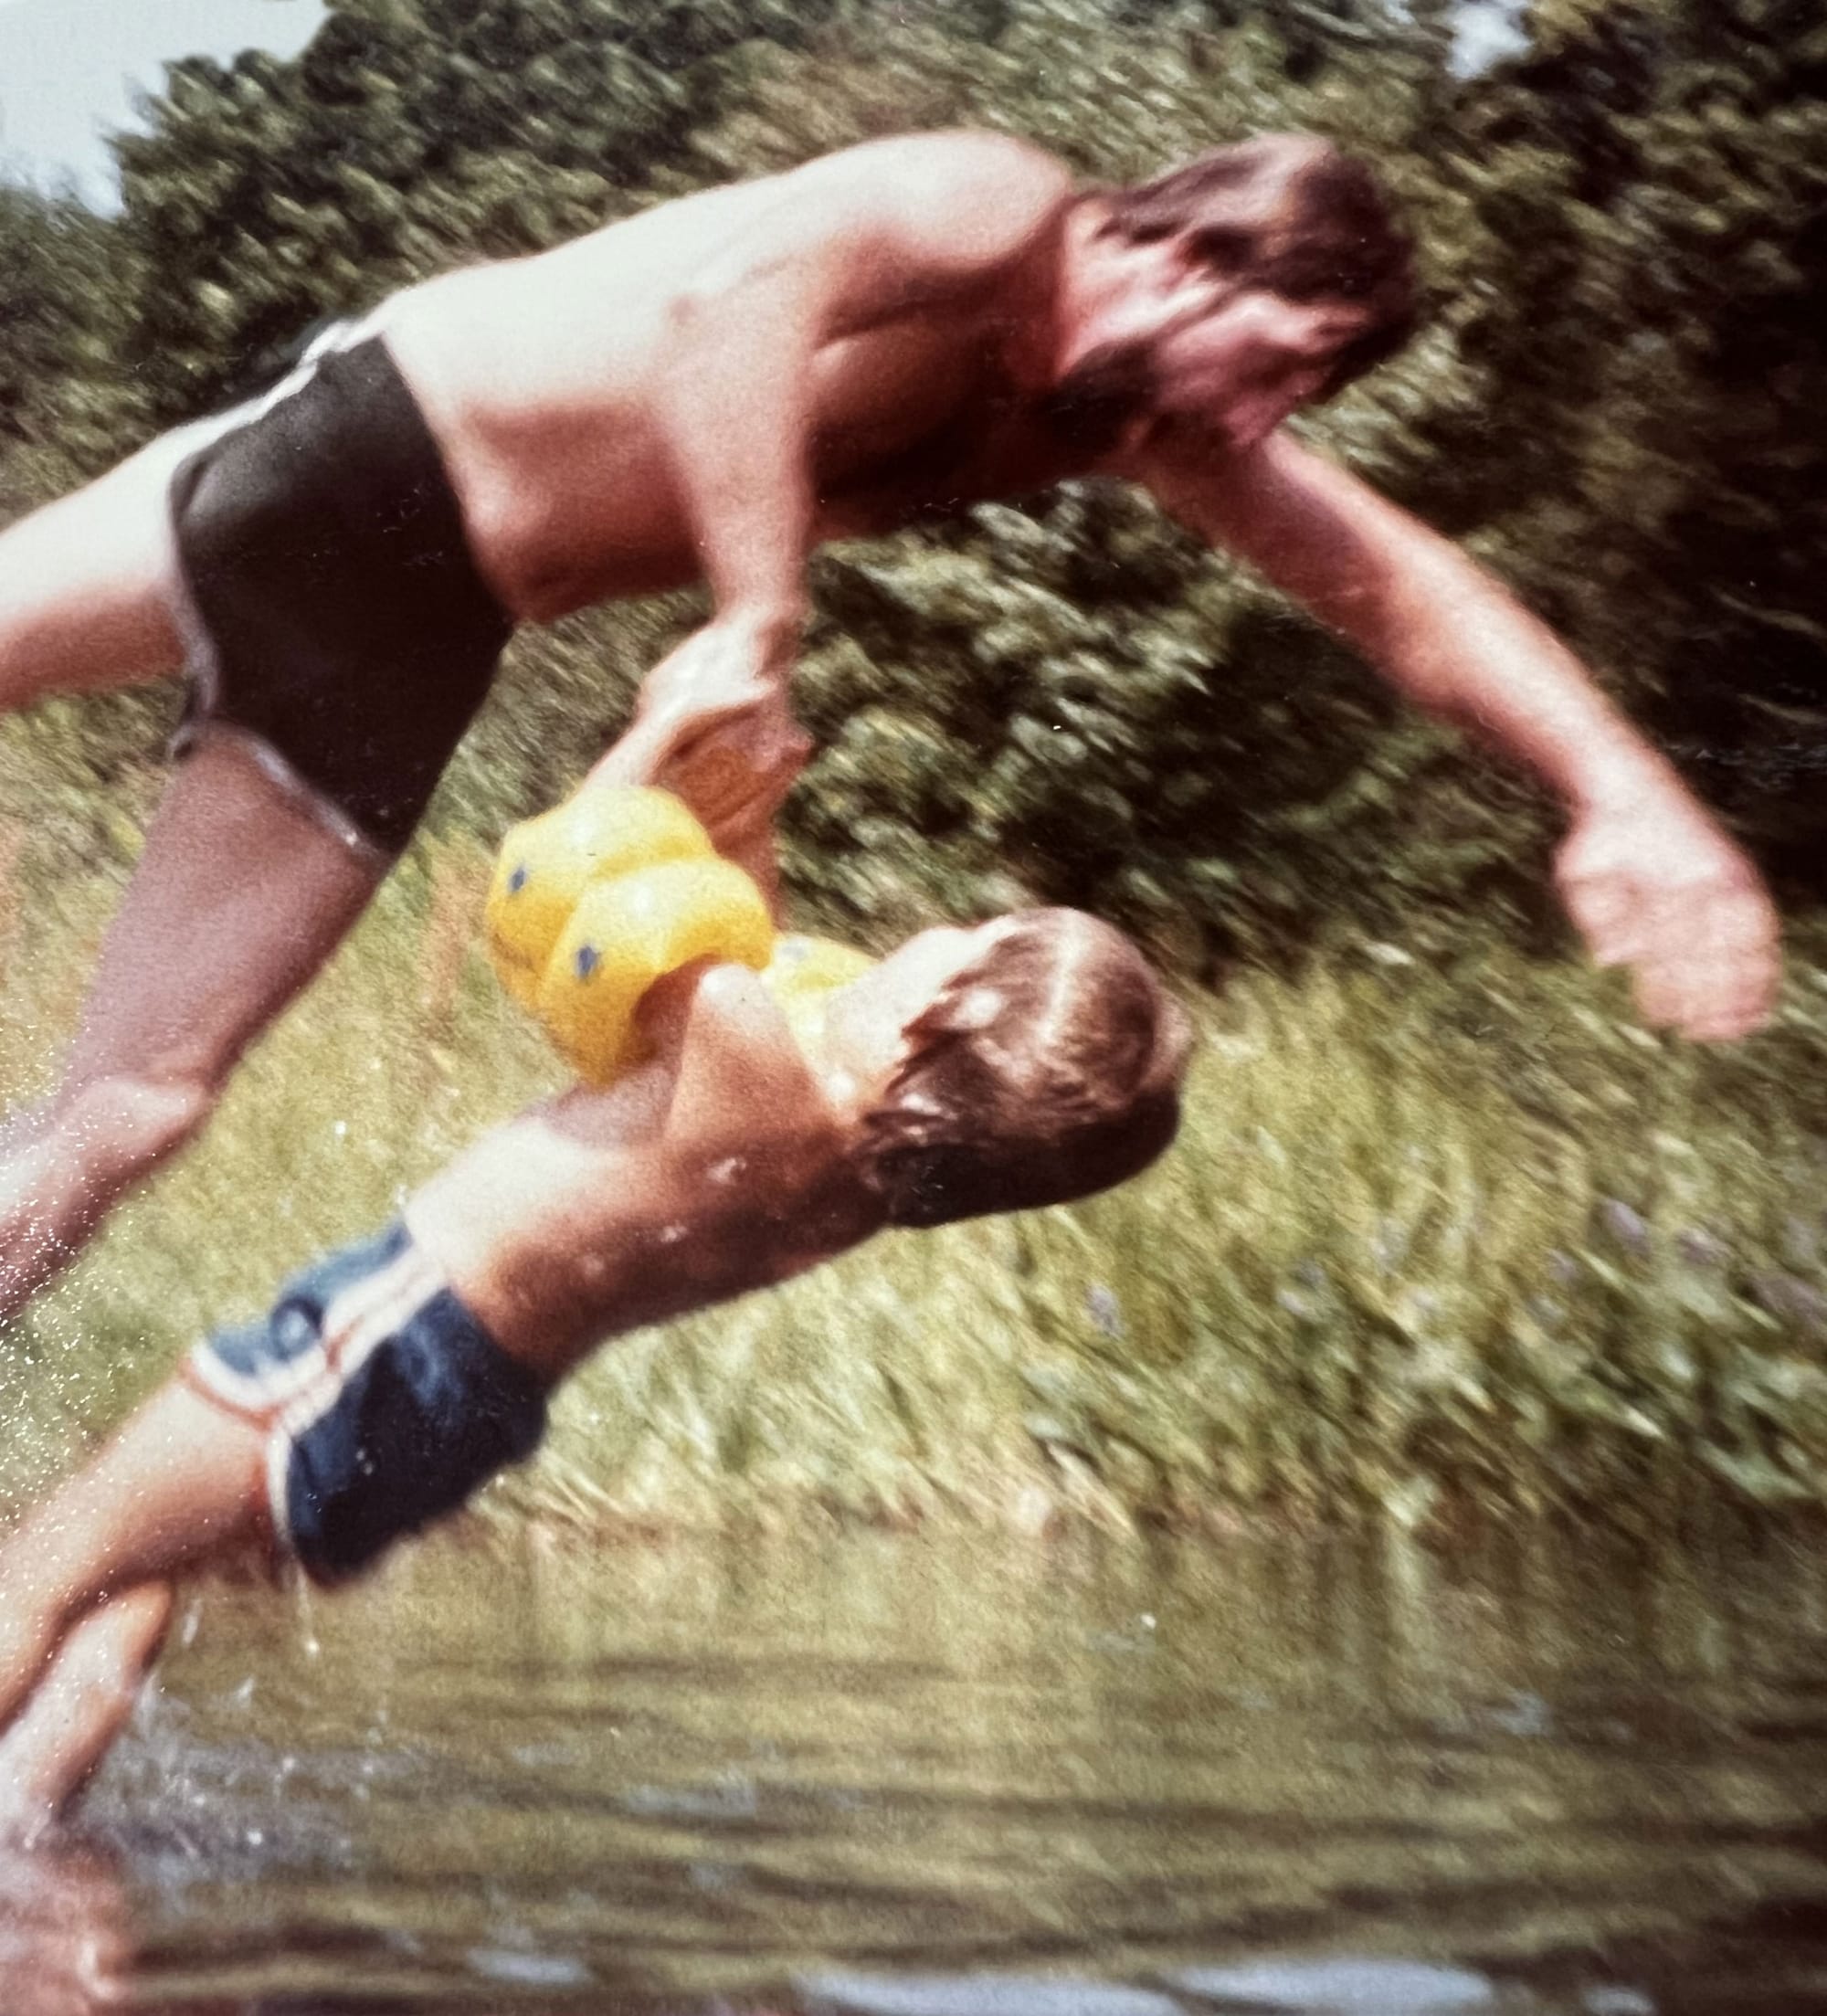 Father and small son, already soaking wet, in vintage trunks (the son in yellow water wings) diving and/or falling into a pond